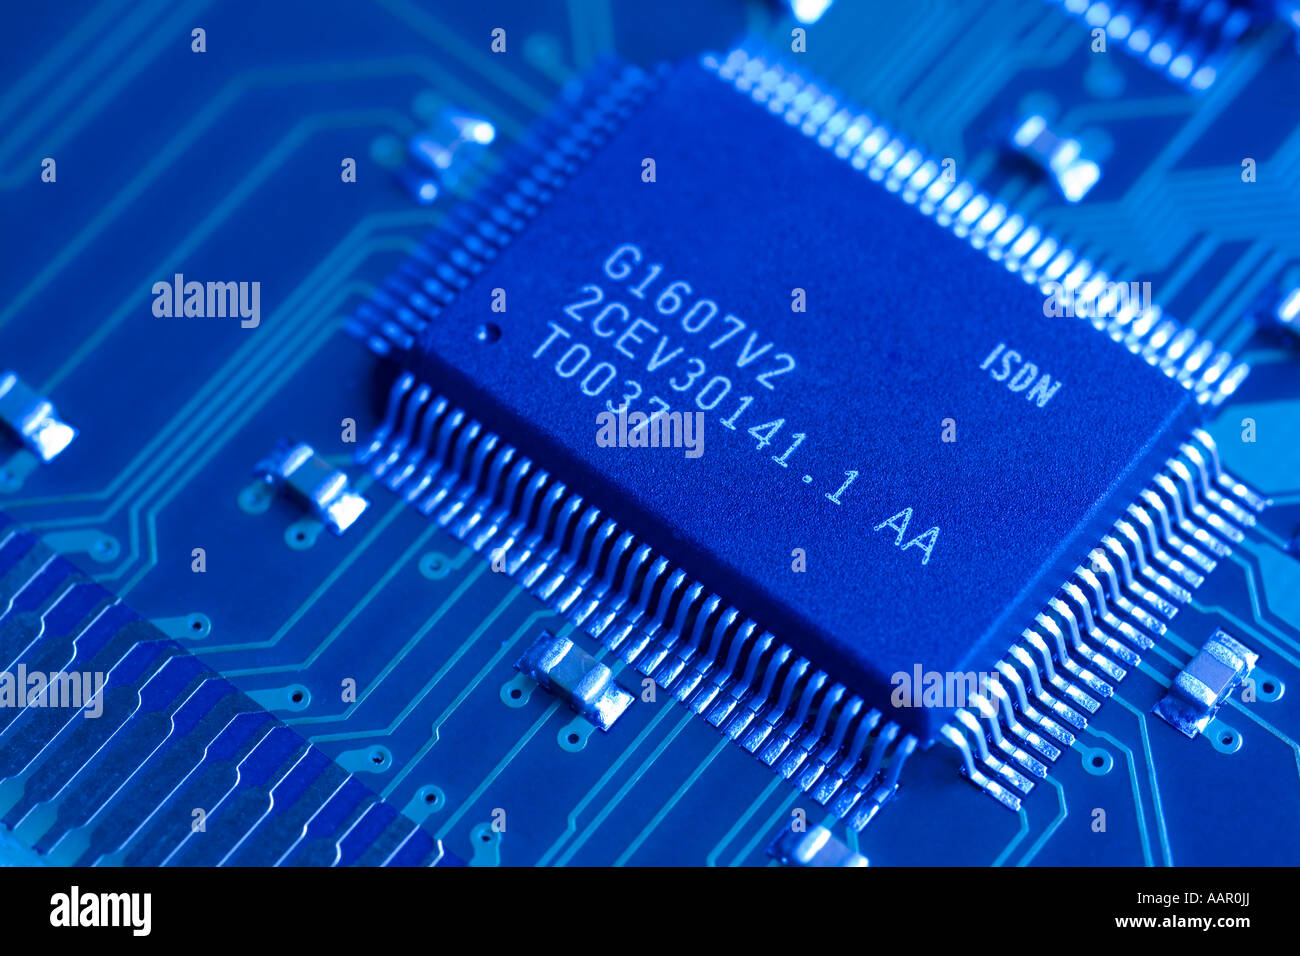 Computer micro chips on a printed circuit board Stock Photo